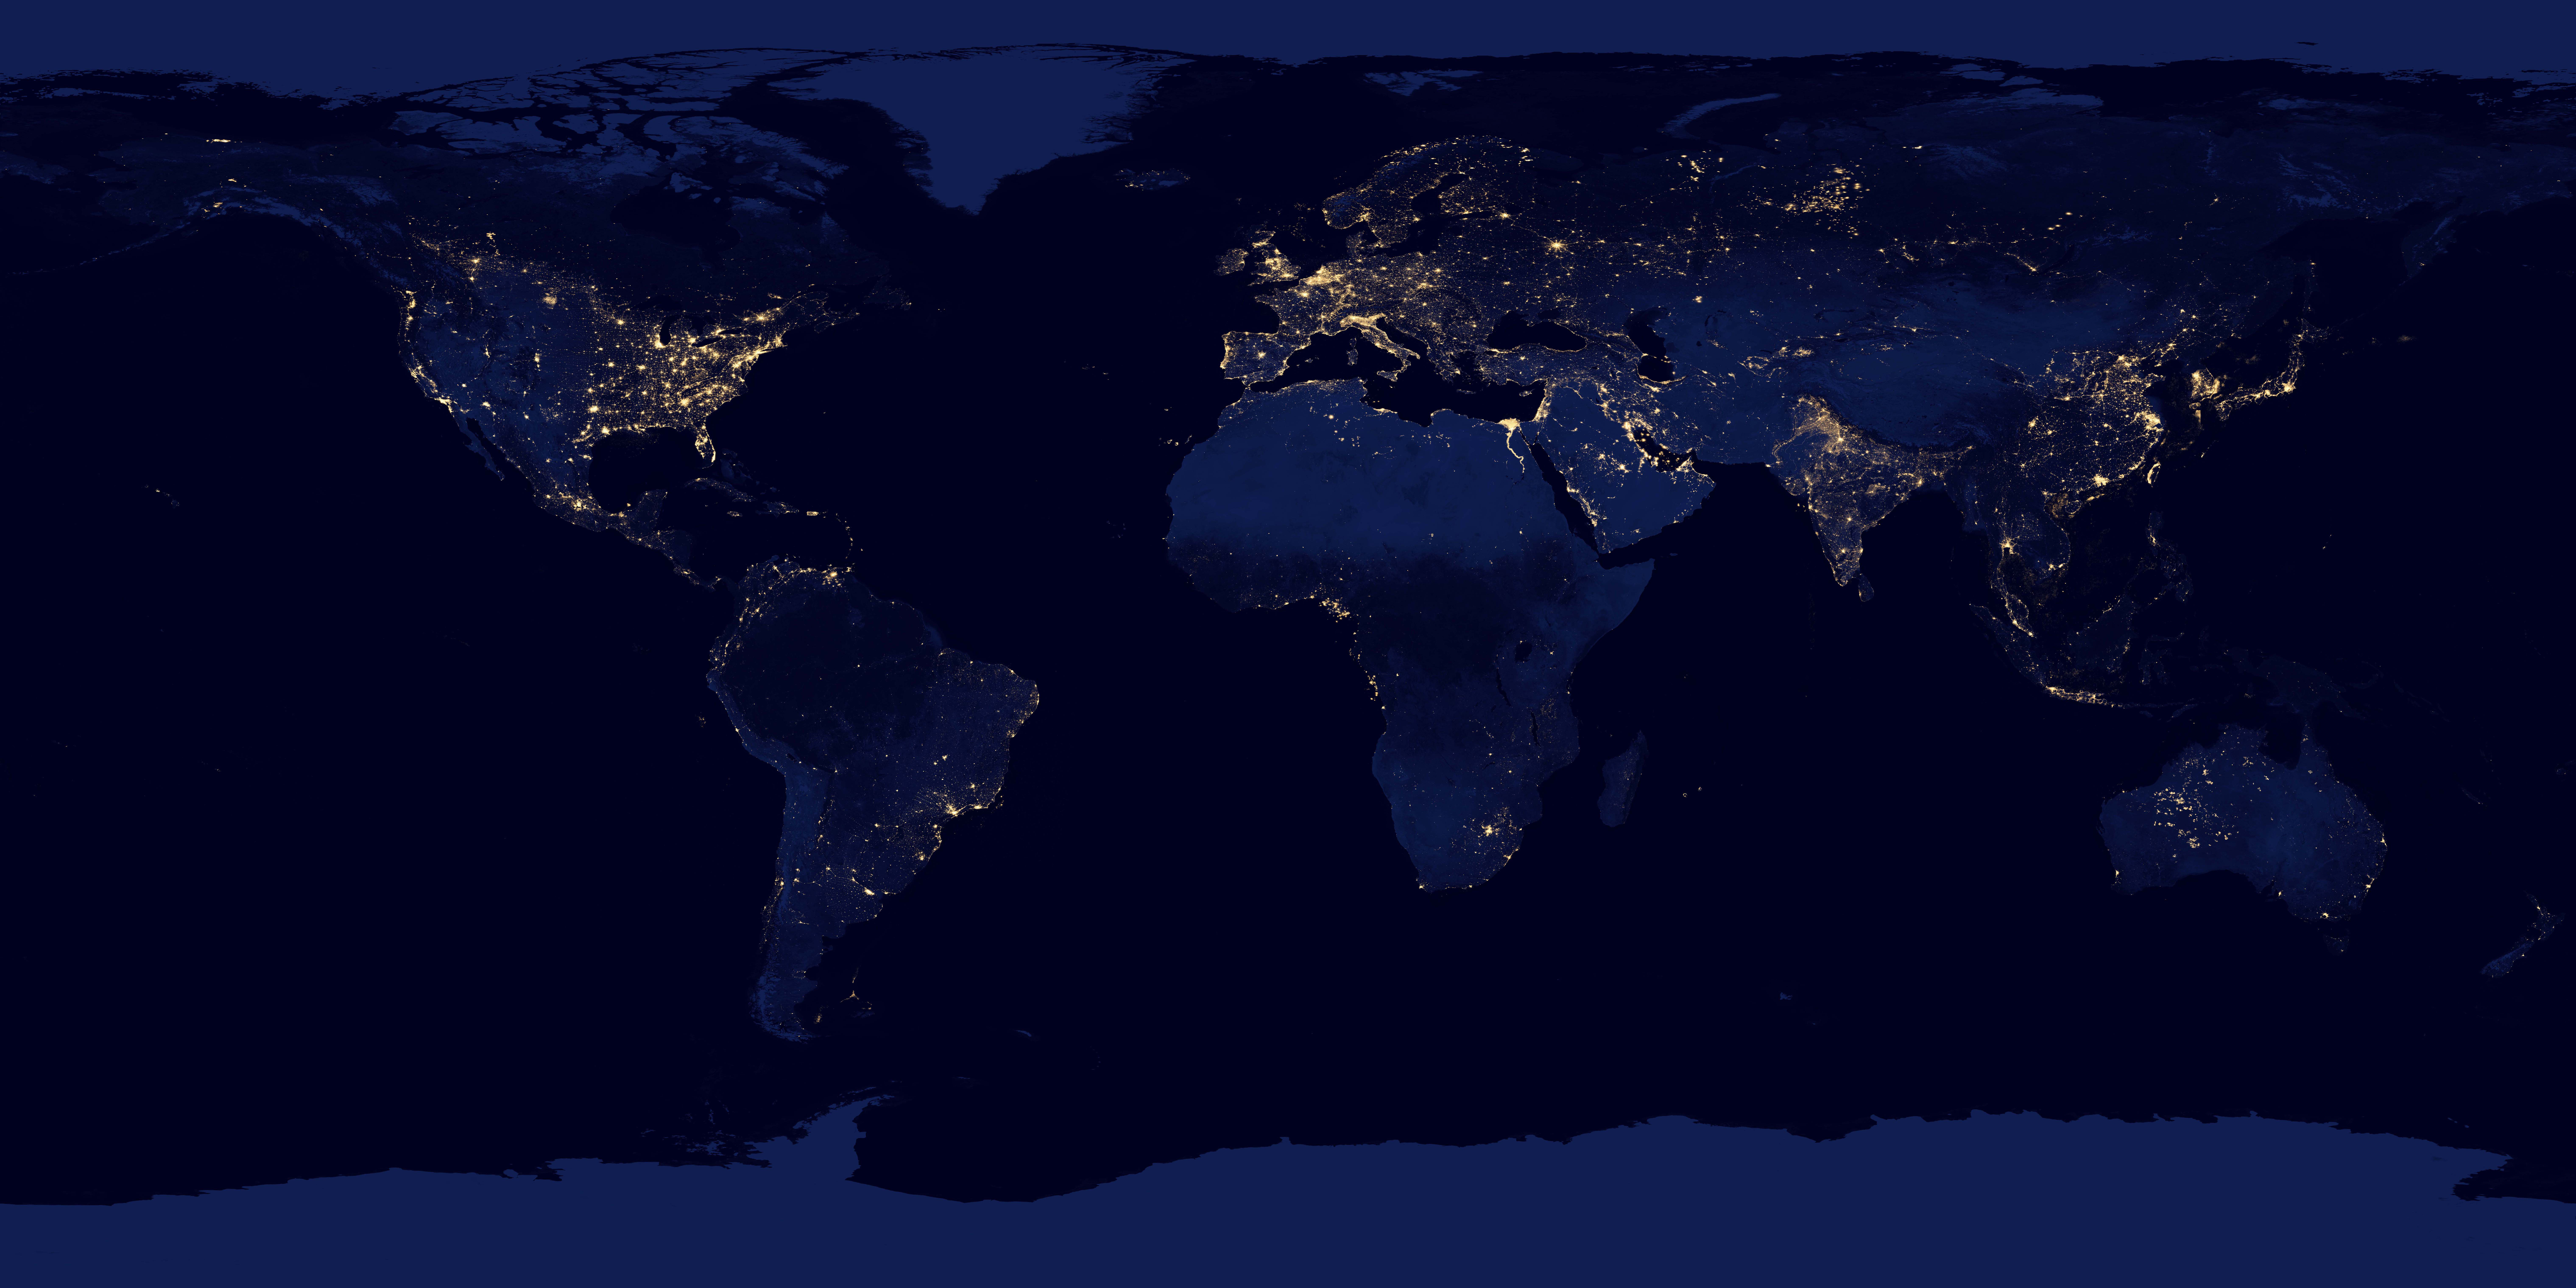 General 12150x6075 Earth continents satellite photo night city lights